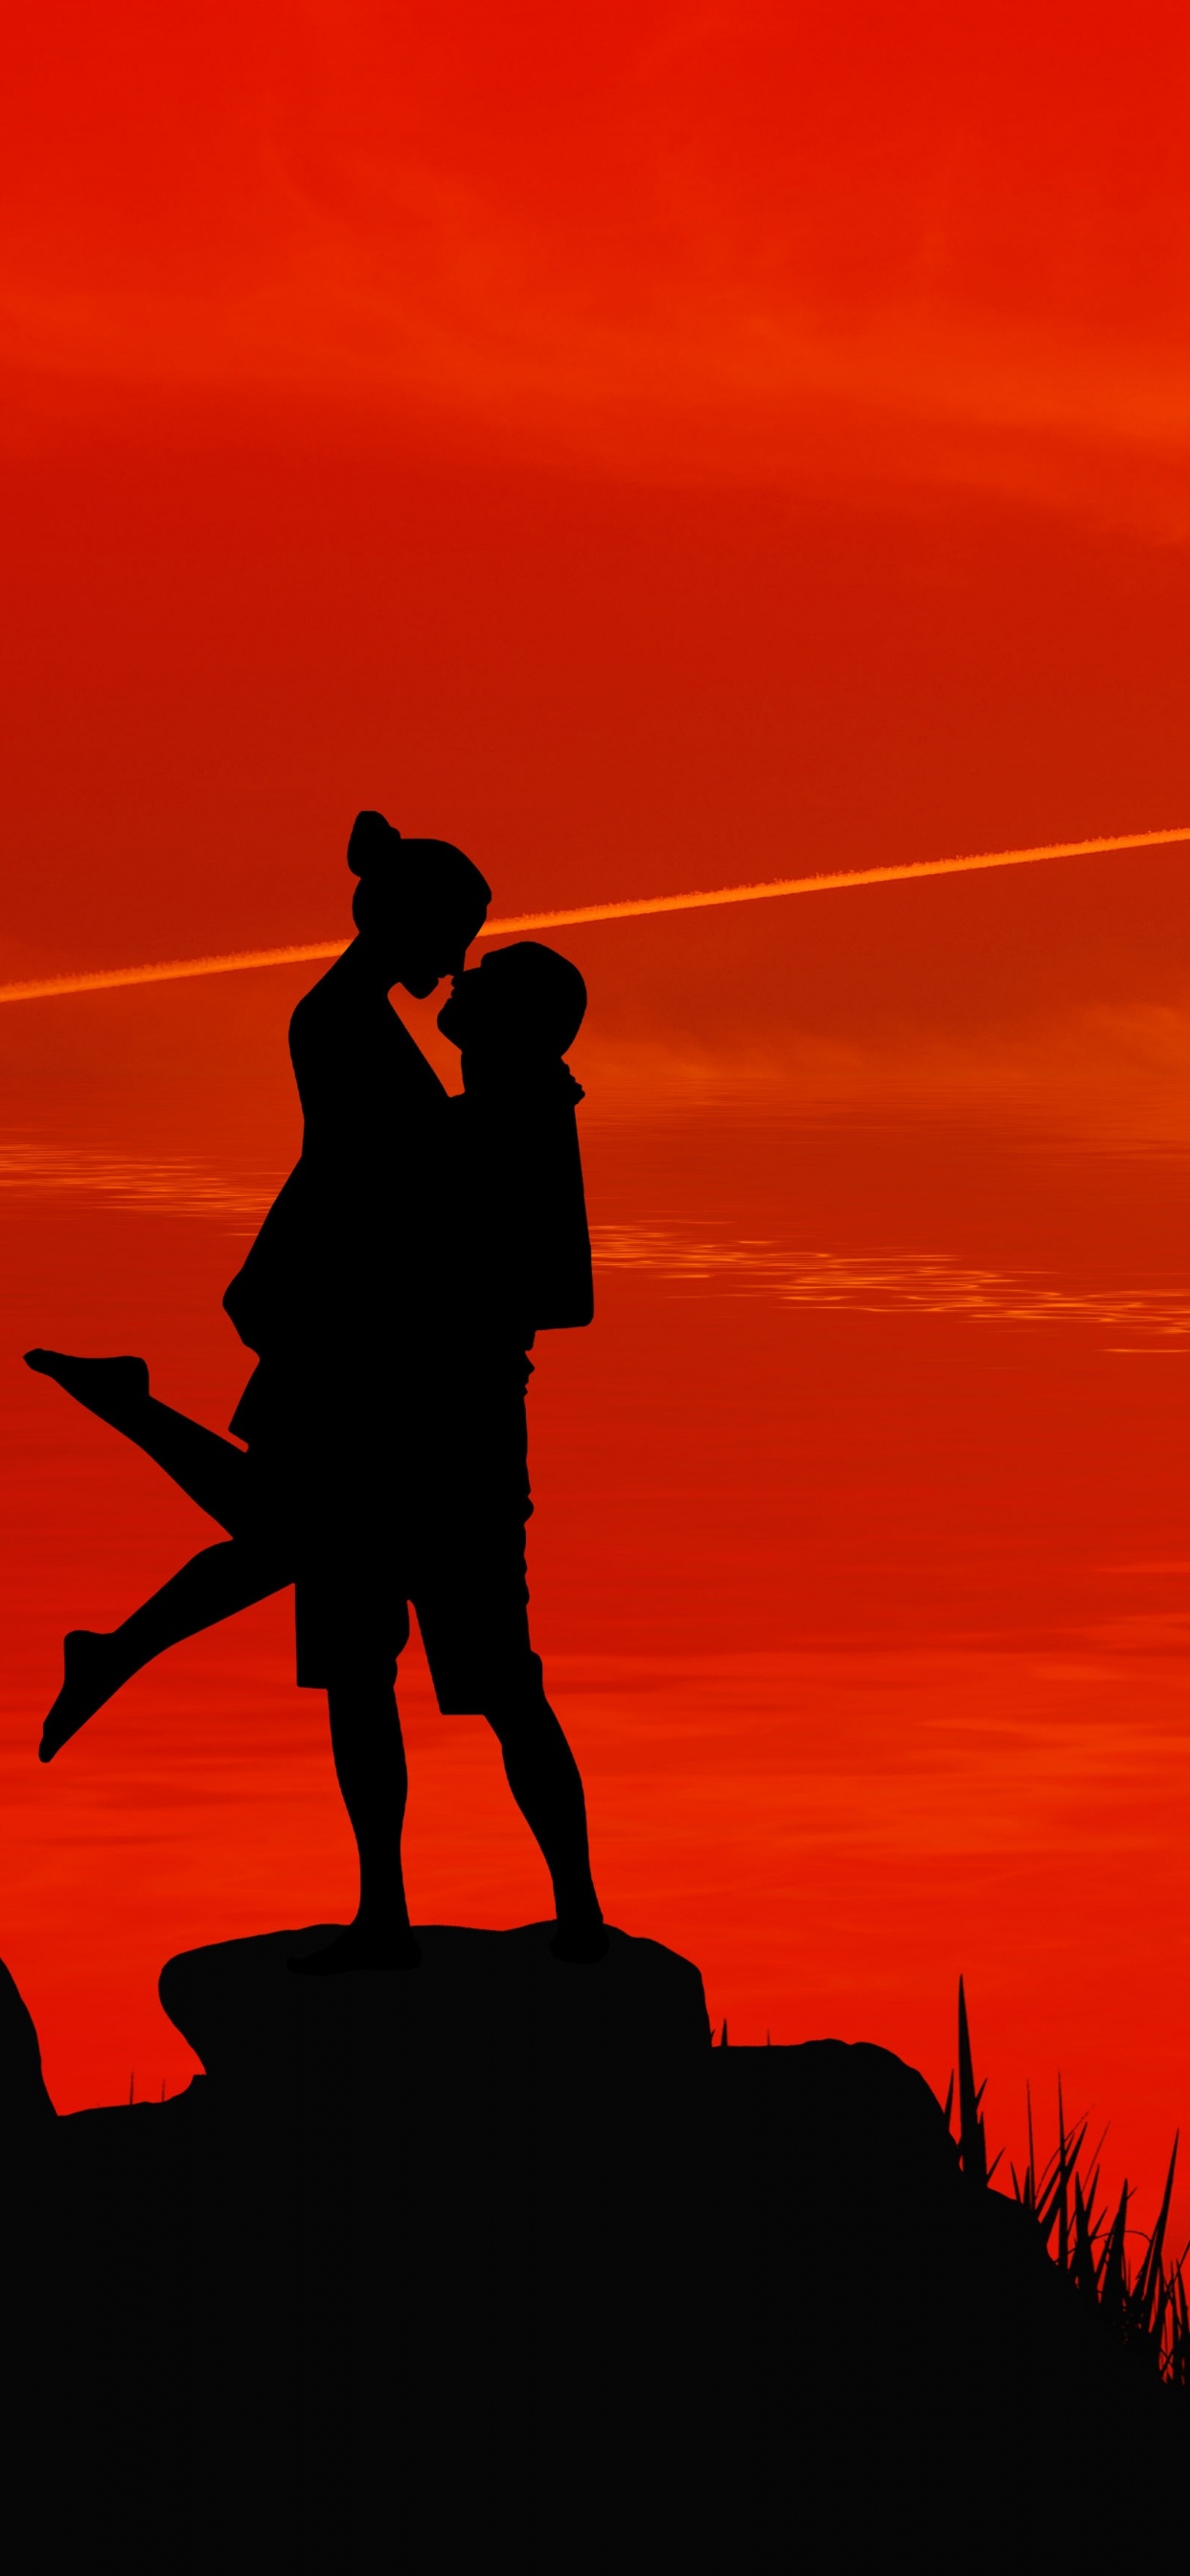 Silhouette, Sunset, Passion, People in Nature, Red. Wallpaper in 1242x2688 Resolution